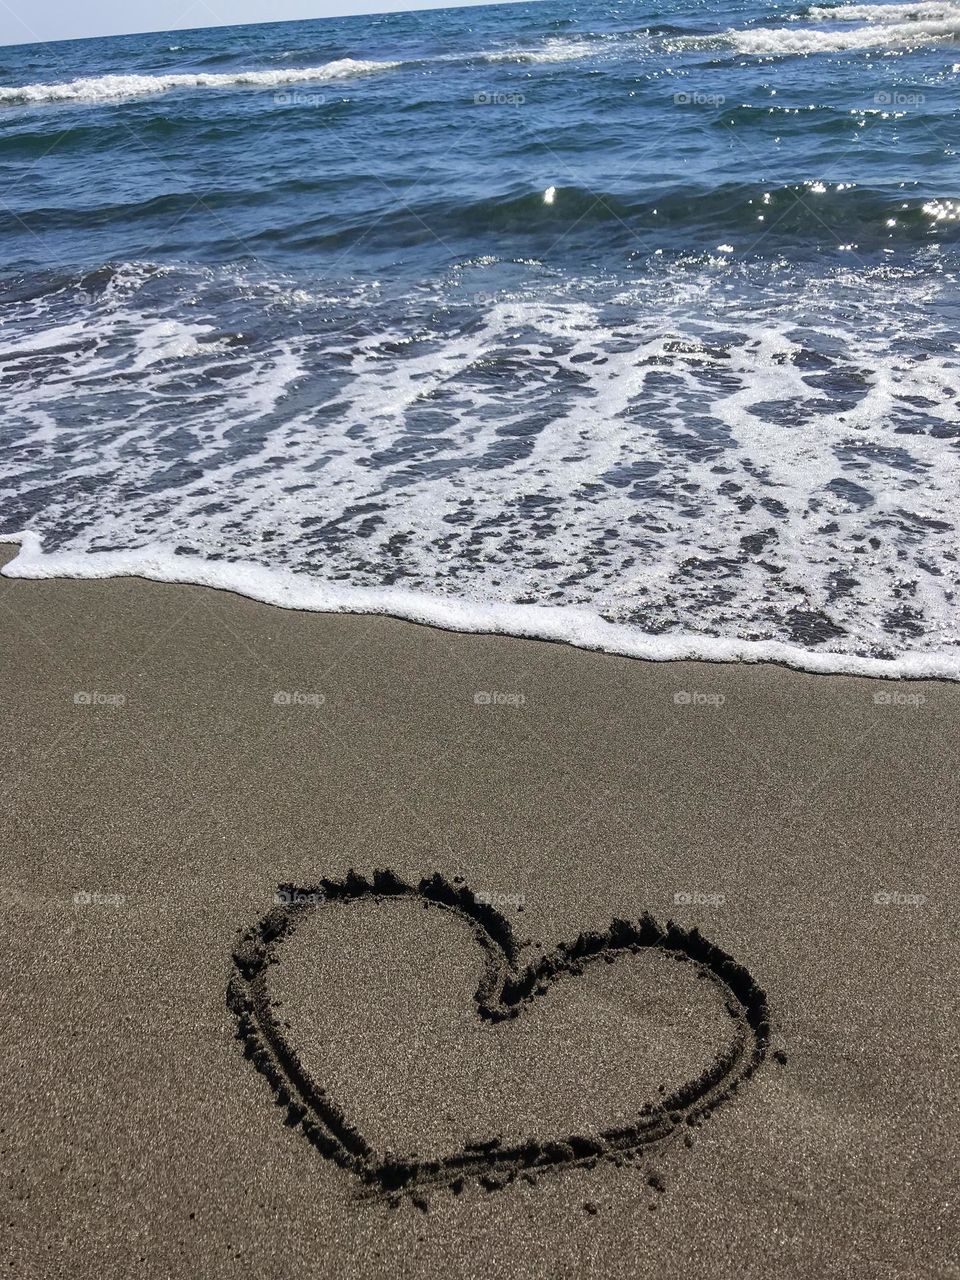 Love is all around us, you can feel it in the air. The heart is drawn on the sand at the beach in Ulcinj, the state of Montenegro.